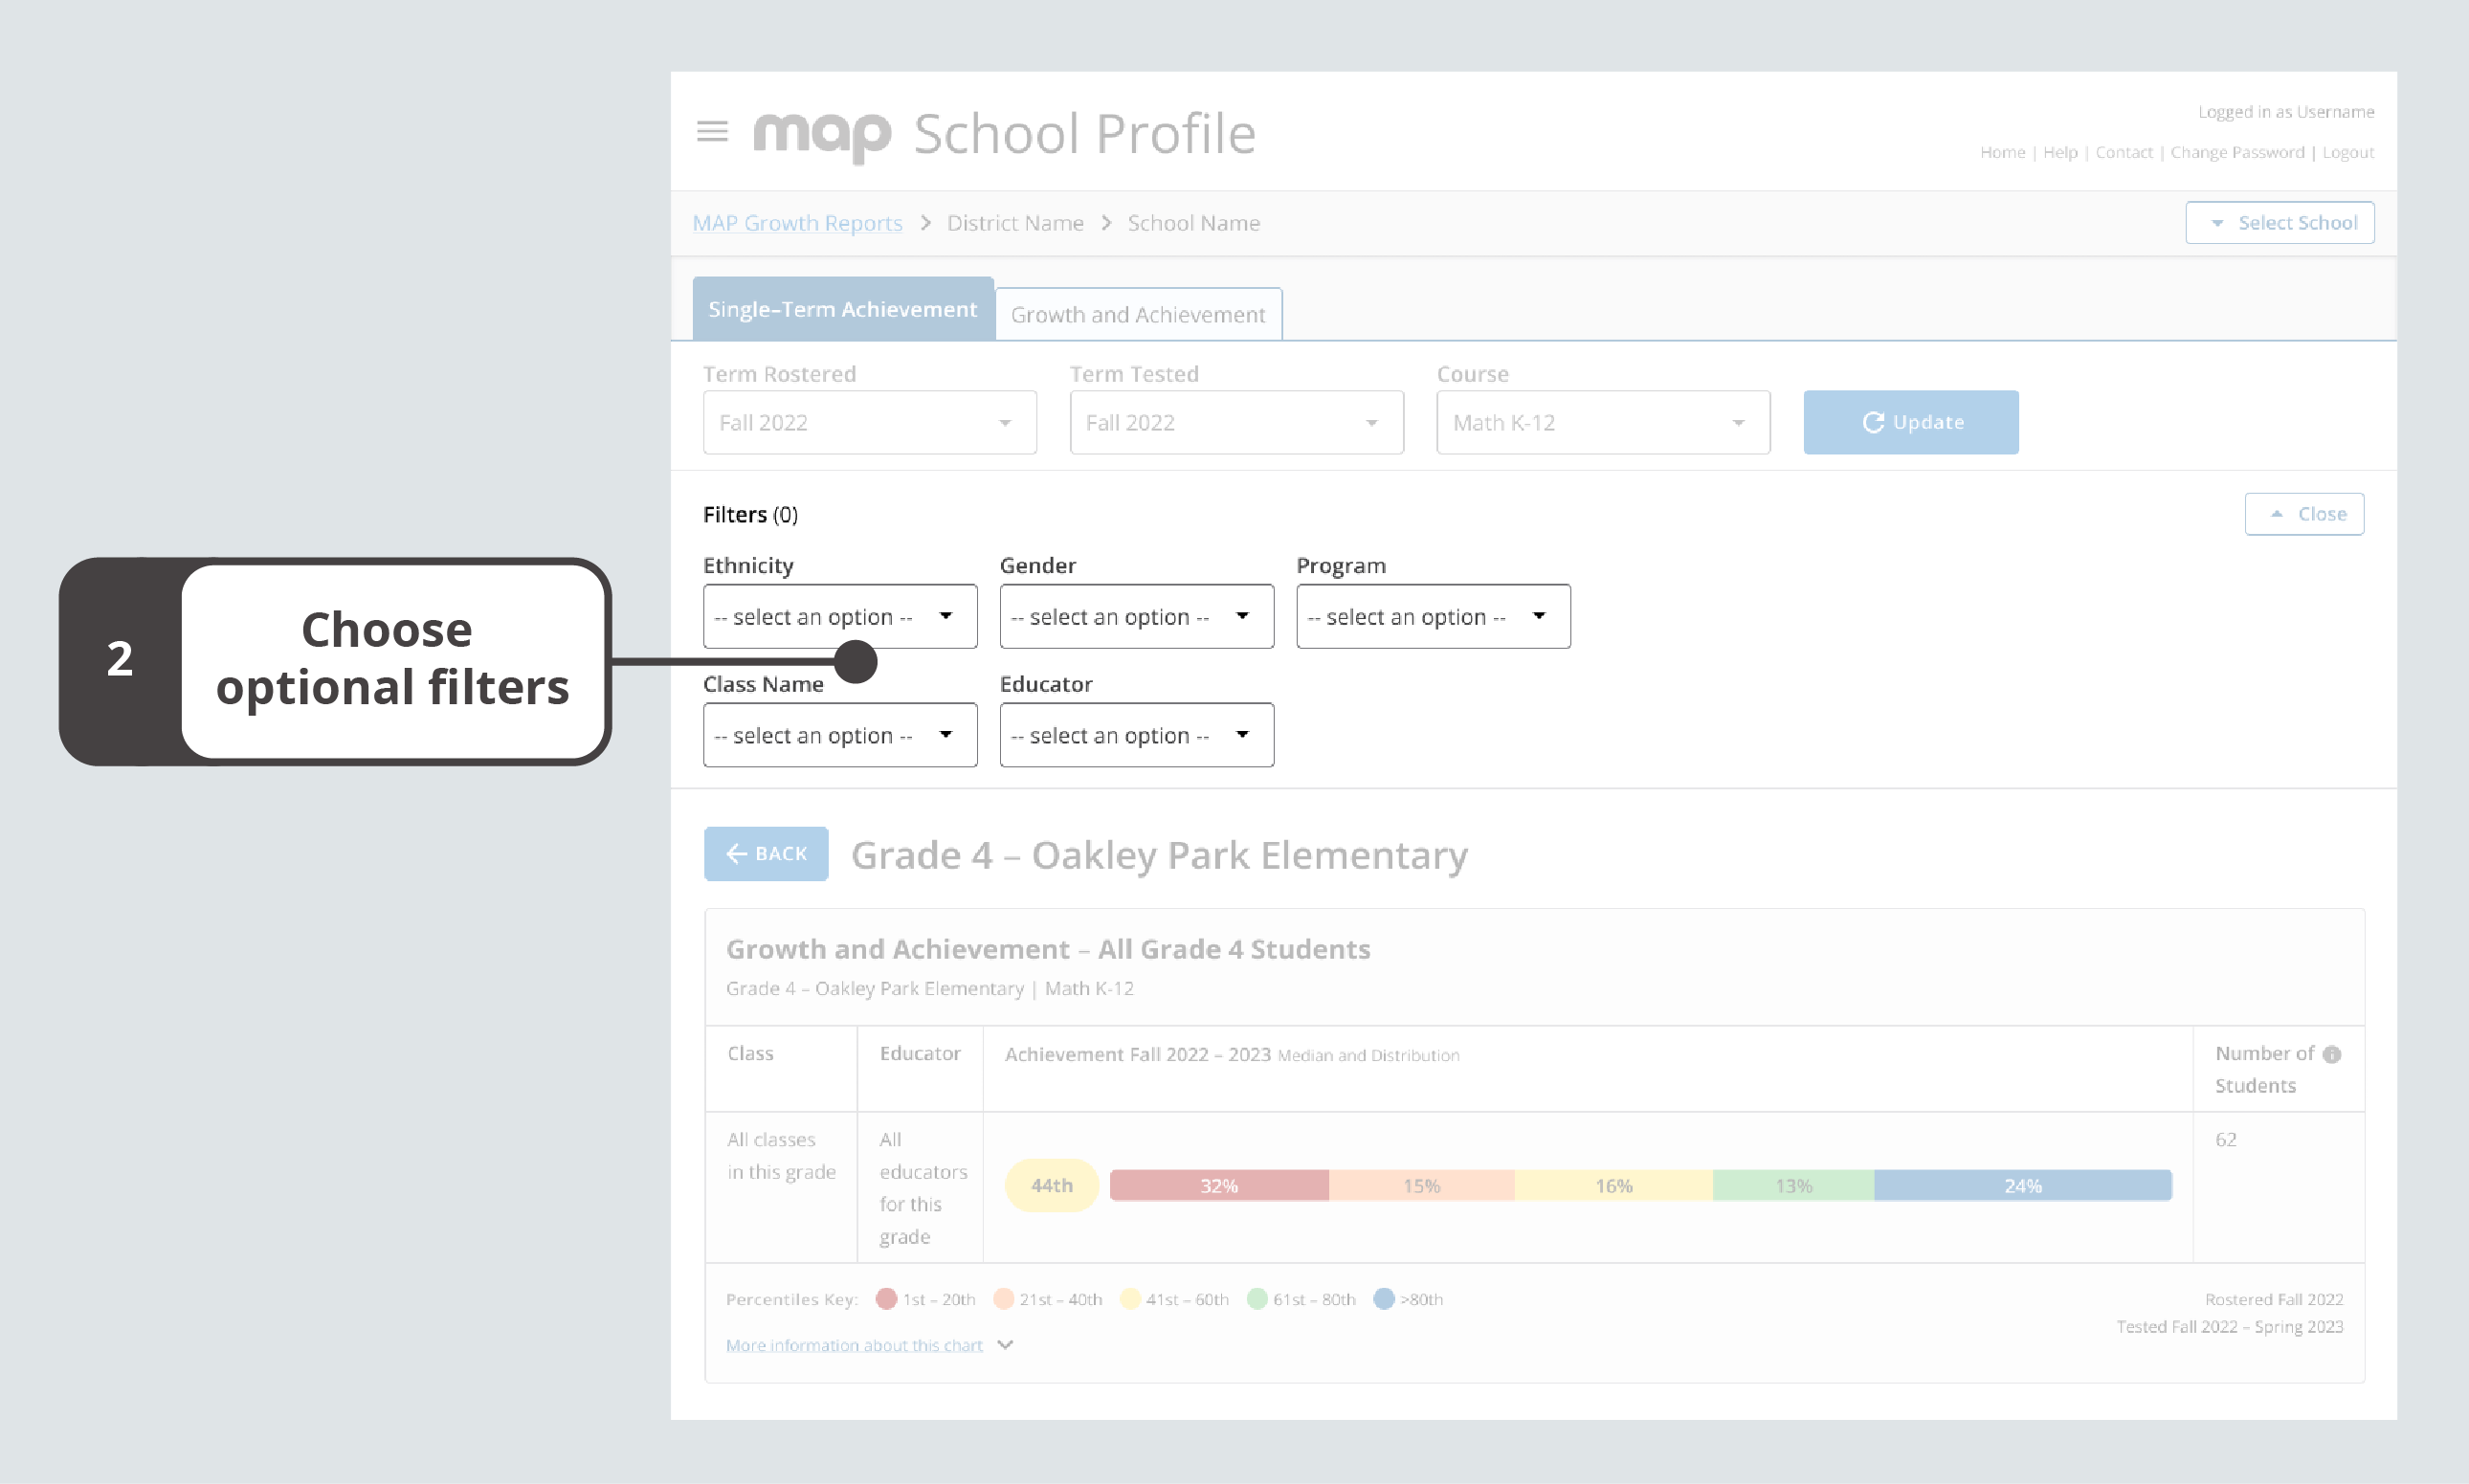 The optional filters for Ethnicity, Gender, Program, Class Name, and Educator appear after the required filters of Term Rostered, Term Tested, and Course. 